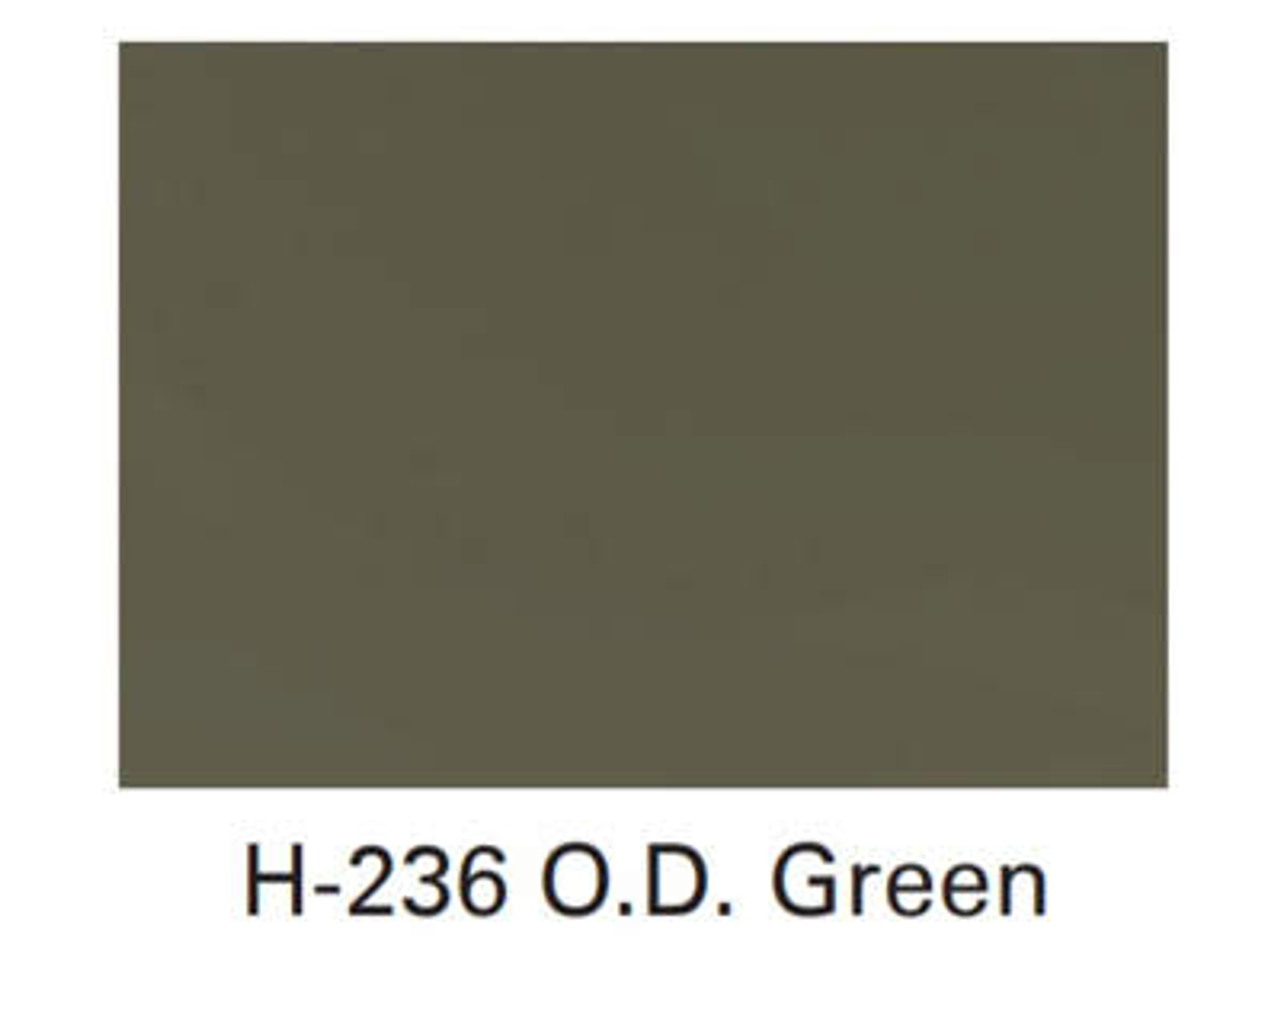 O D Green Cerakote Coating for Kits Add-On - Solvent Traps Direct - Kits,  Cups and Parts - Titanium, Aluminum, Stainless Steel & Carbon Steel